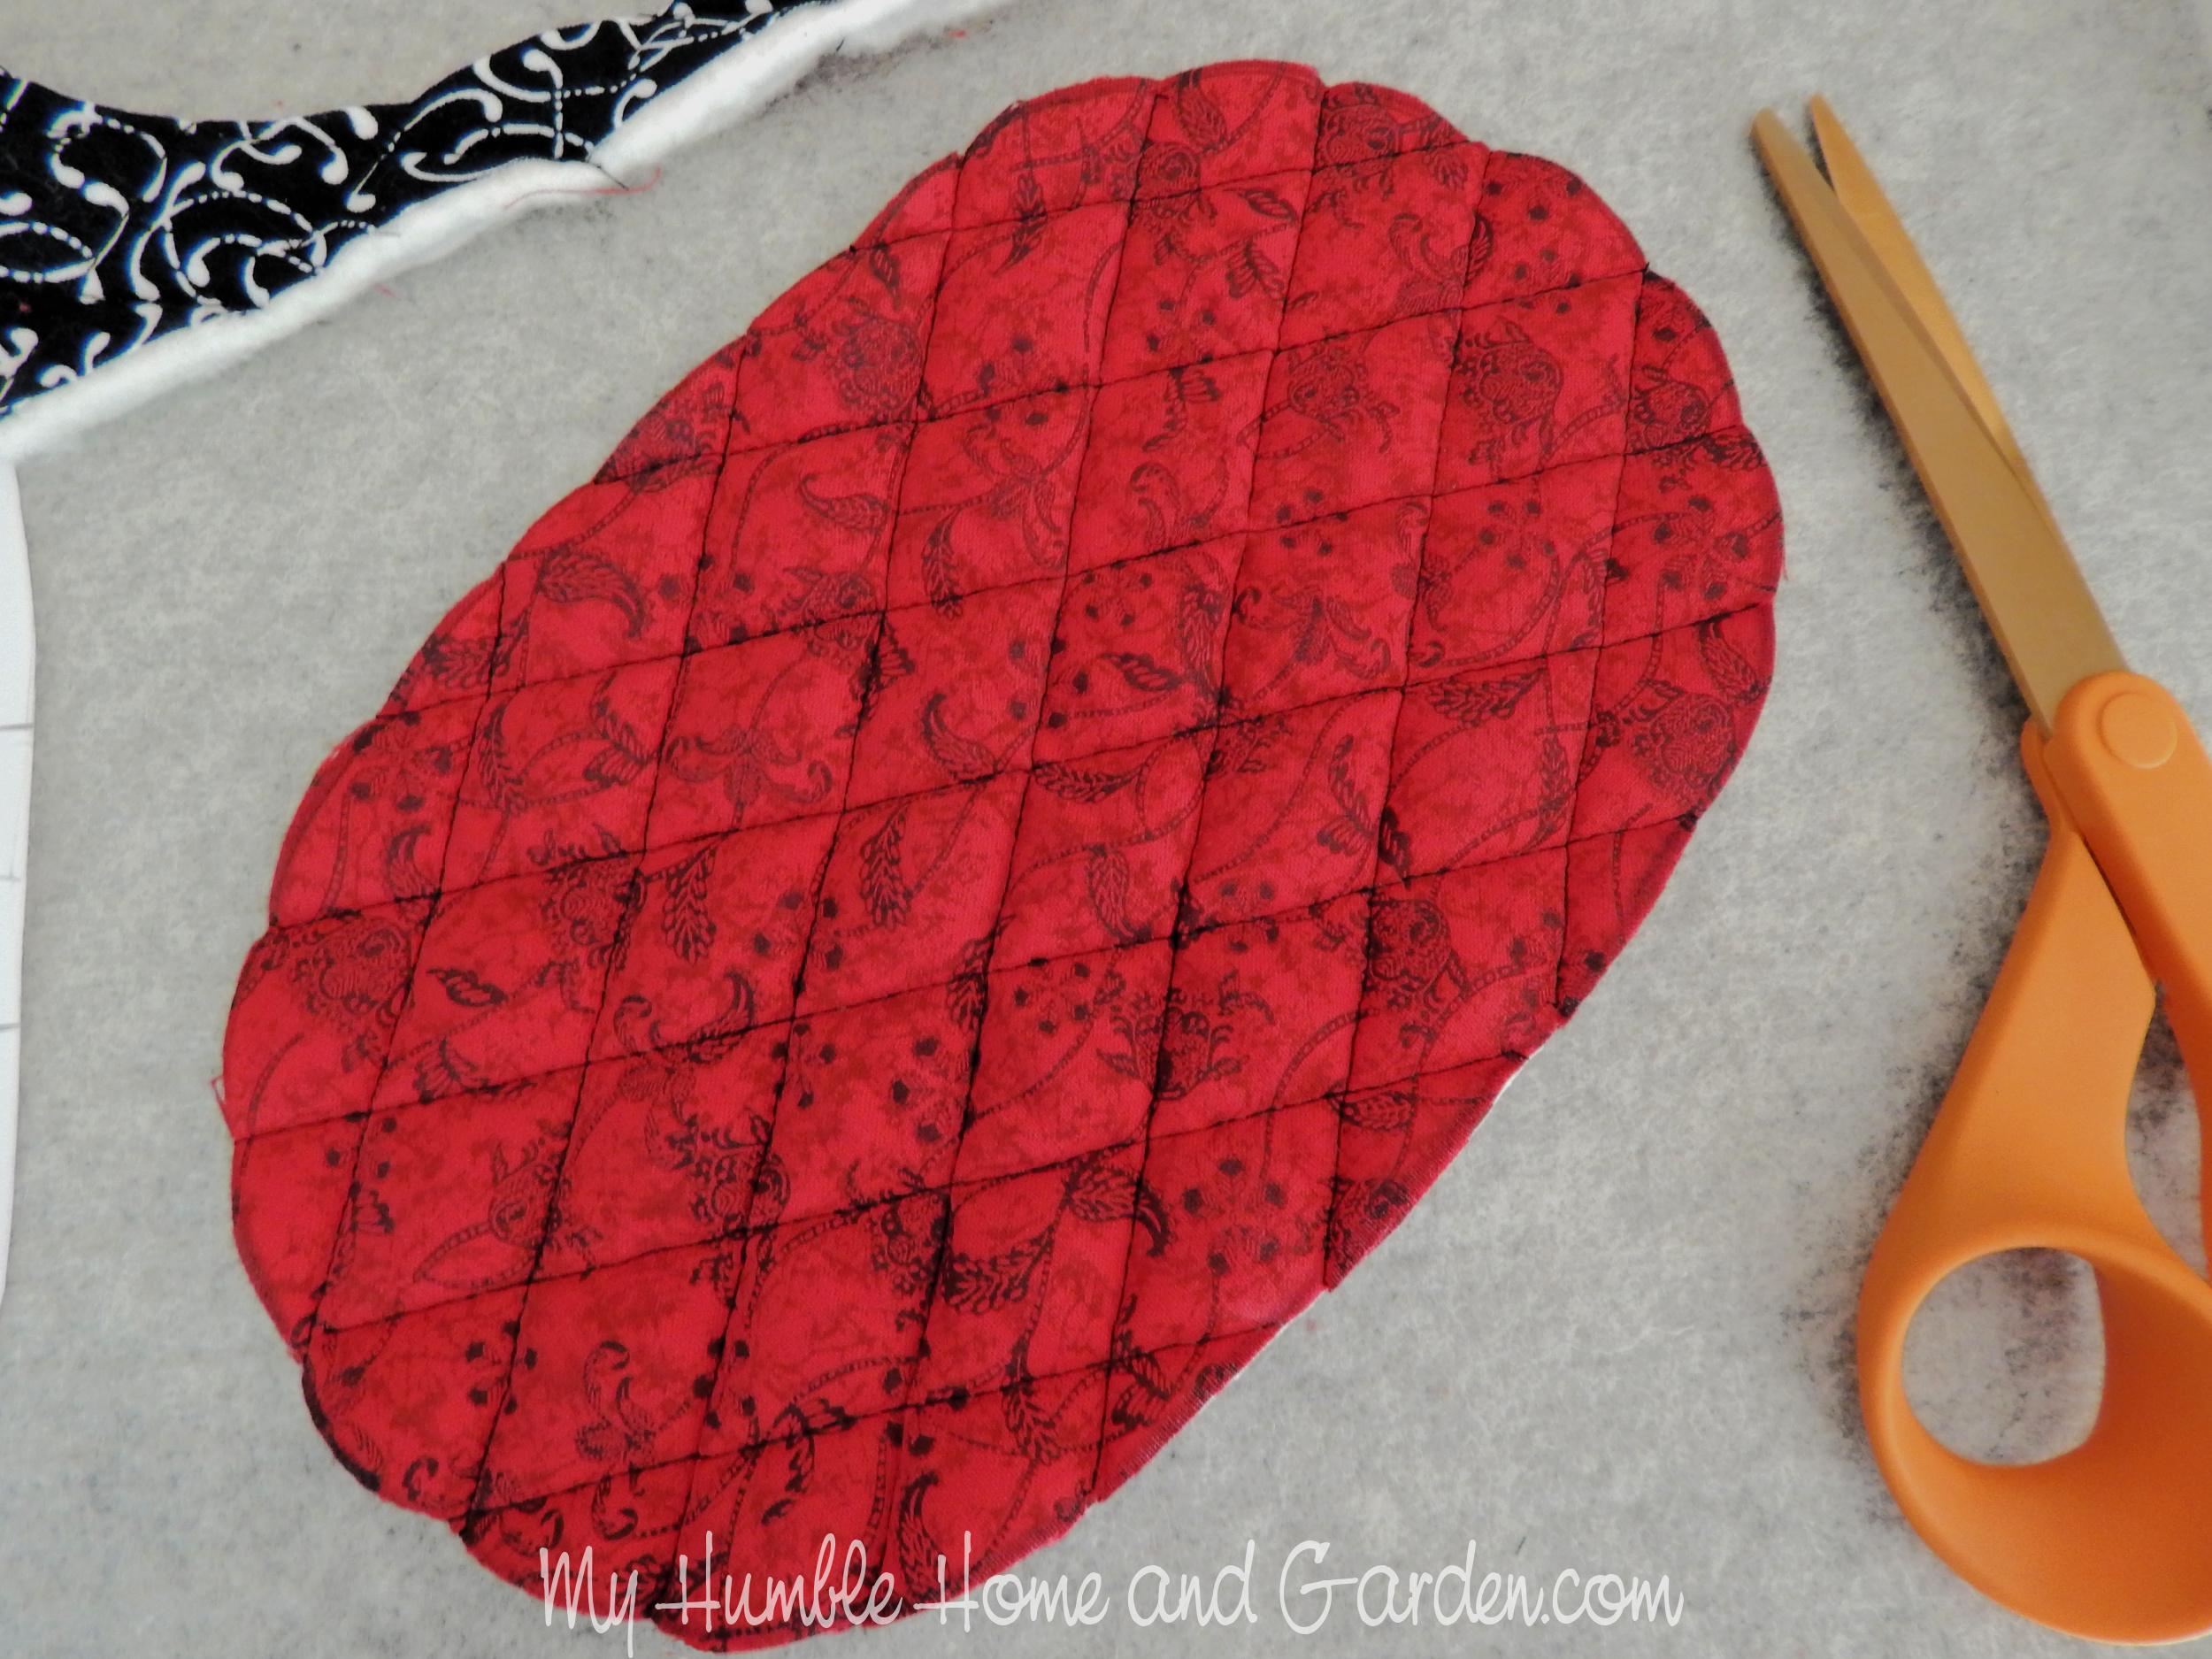 DIY Cute Oven Mitts - Michelle James Designs